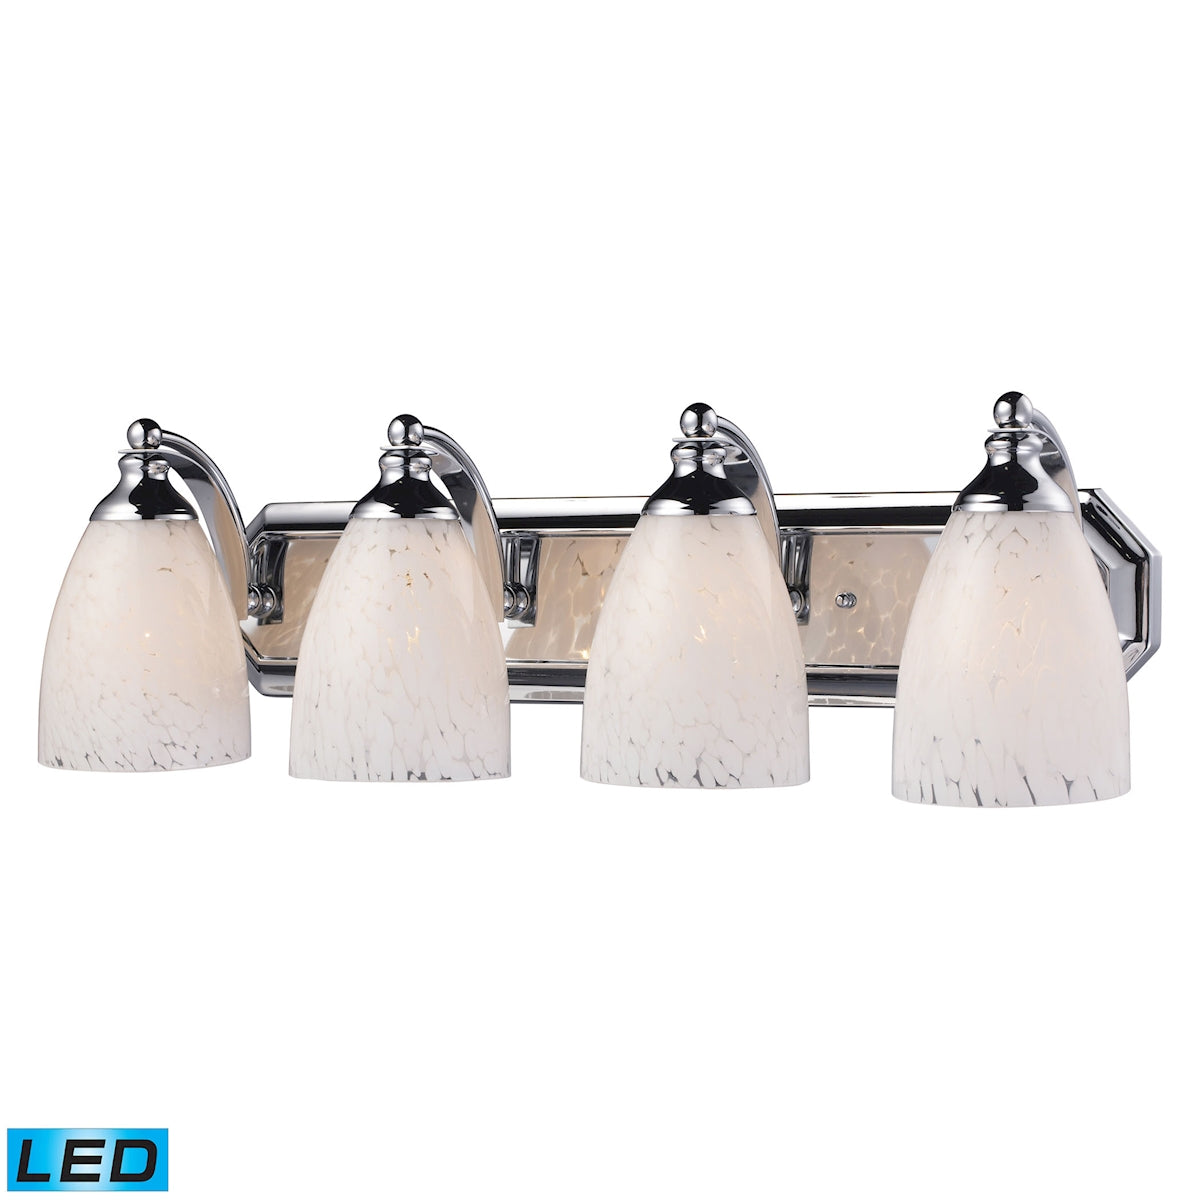 ELK Lighting 570-4C-SW-LED Mix and Match Vanity 4-Light Wall Lamp in Chrome with Snow White Glass - Includes LED Bulbs